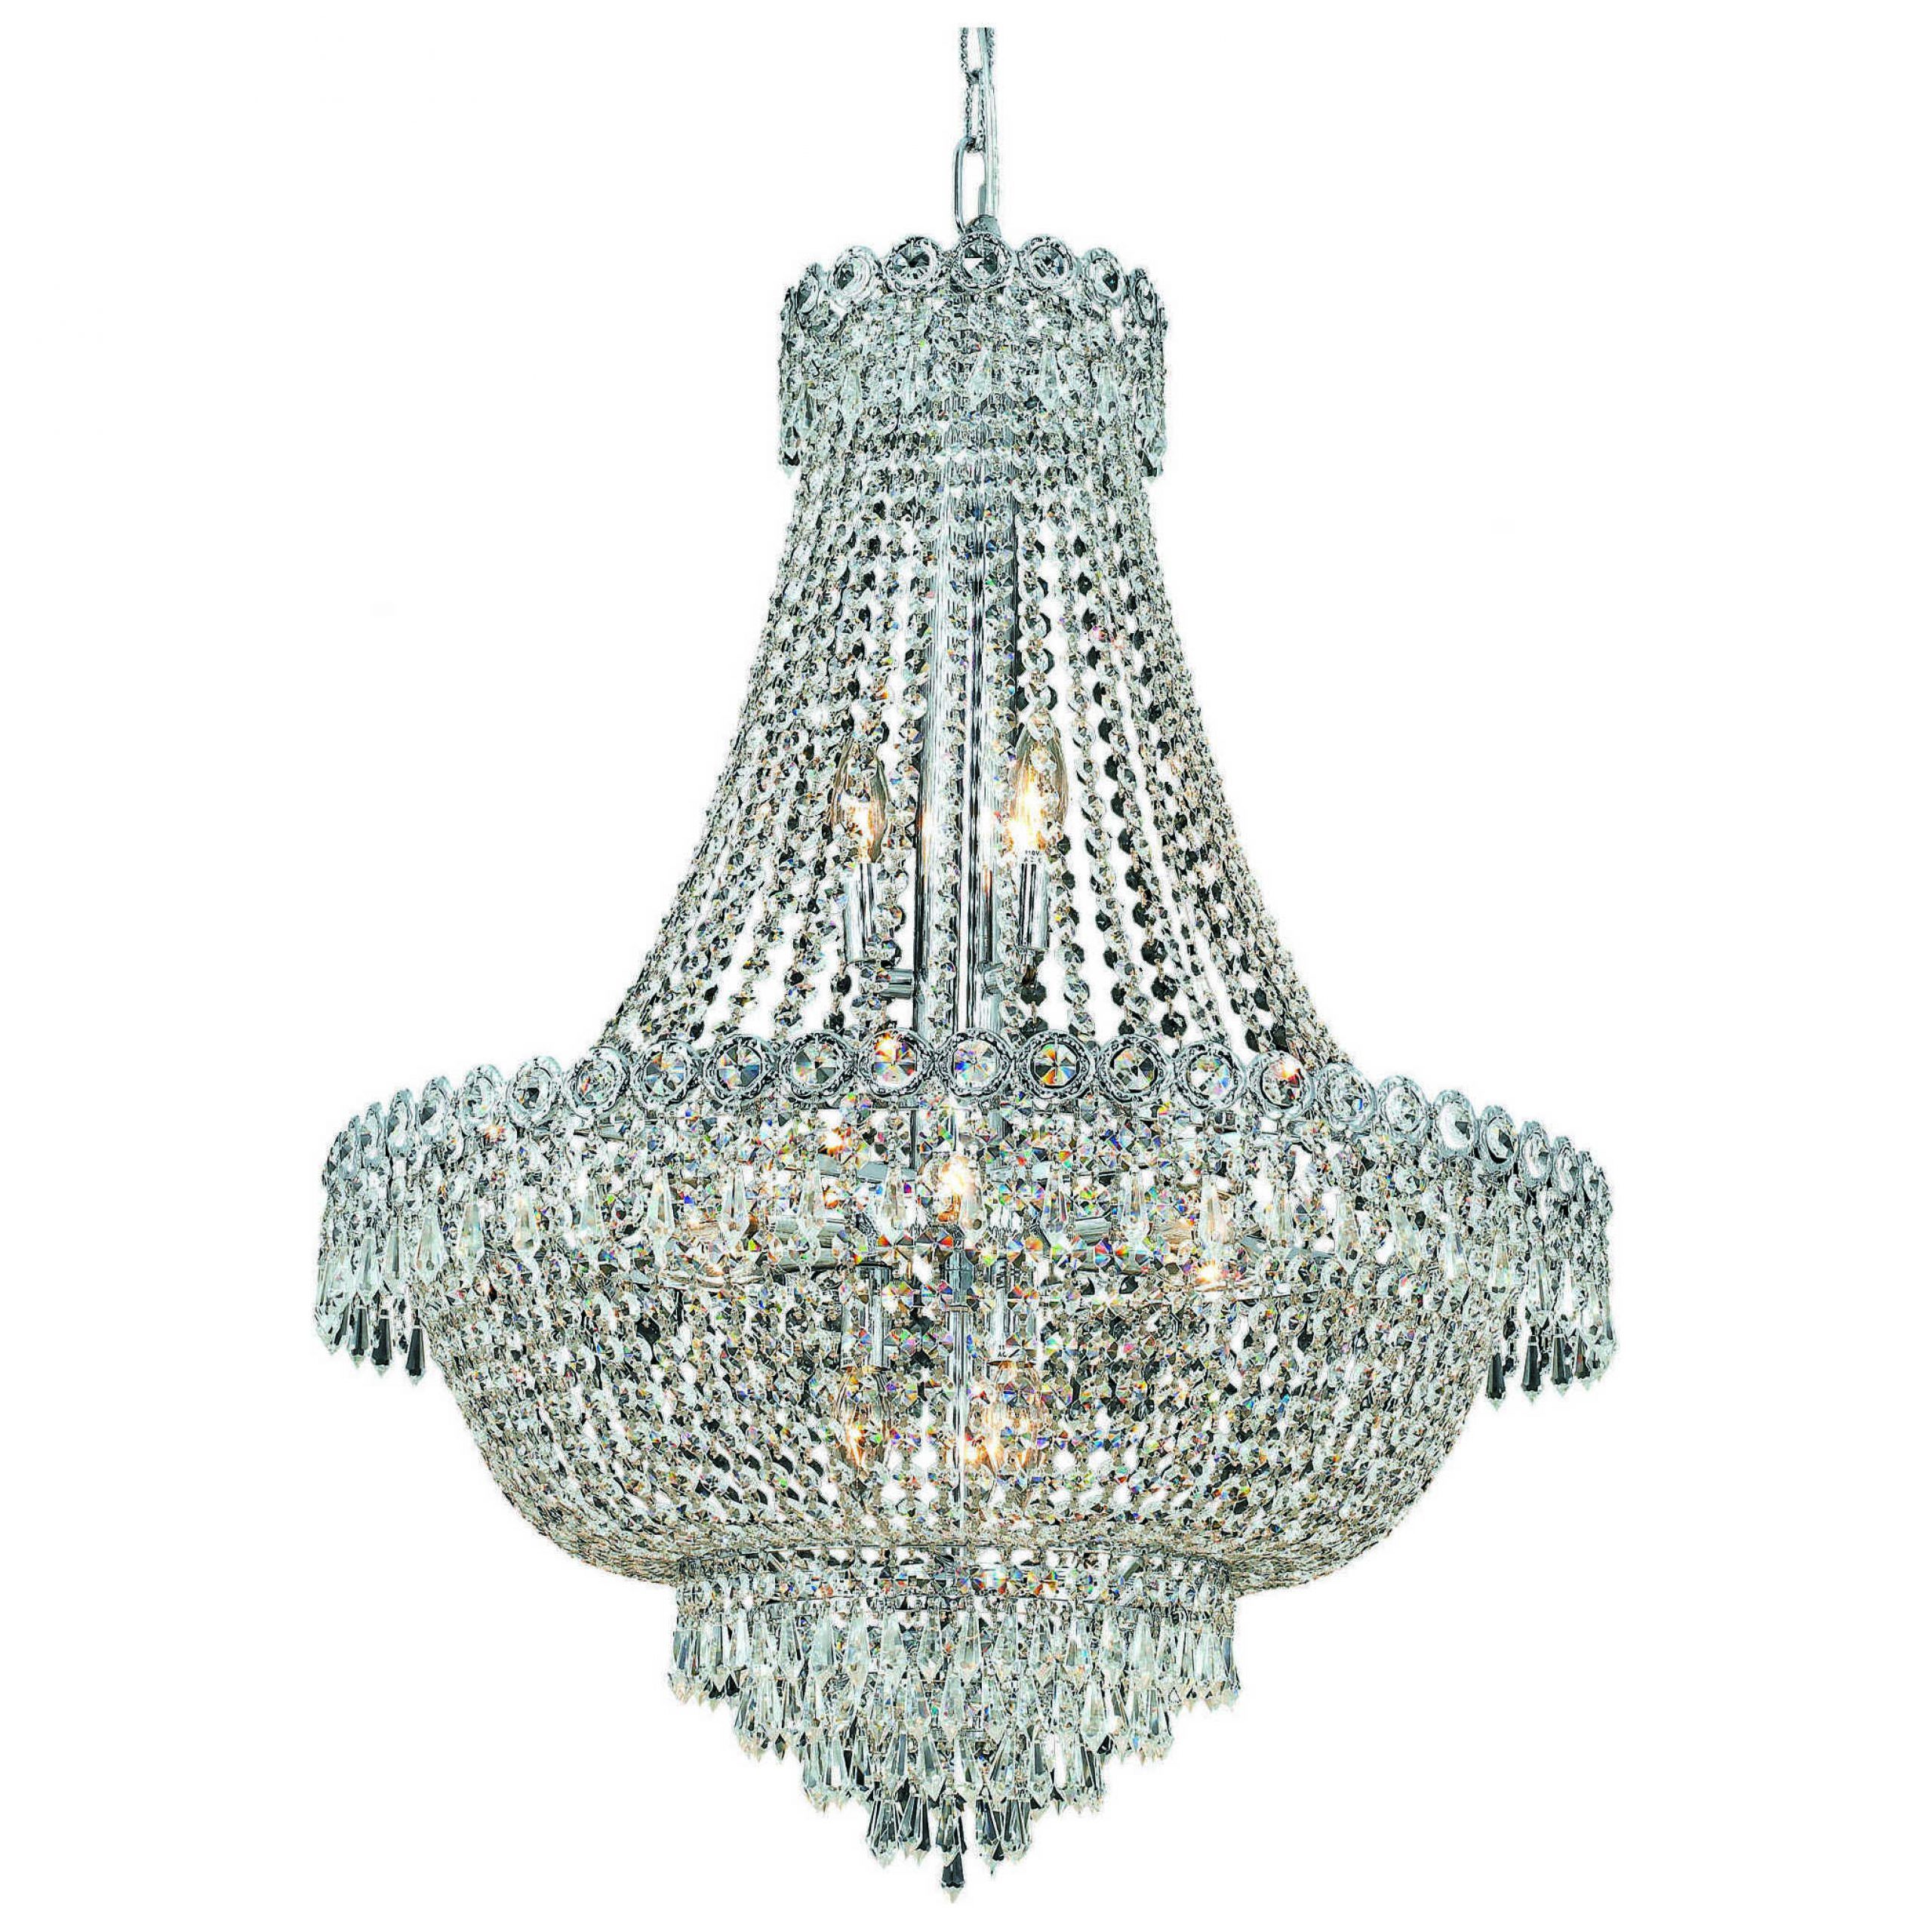 Elegant Lighting Century Royal Cut Chrome & Crystal 12 For Royal Cut Crystal Chandeliers (View 6 of 15)